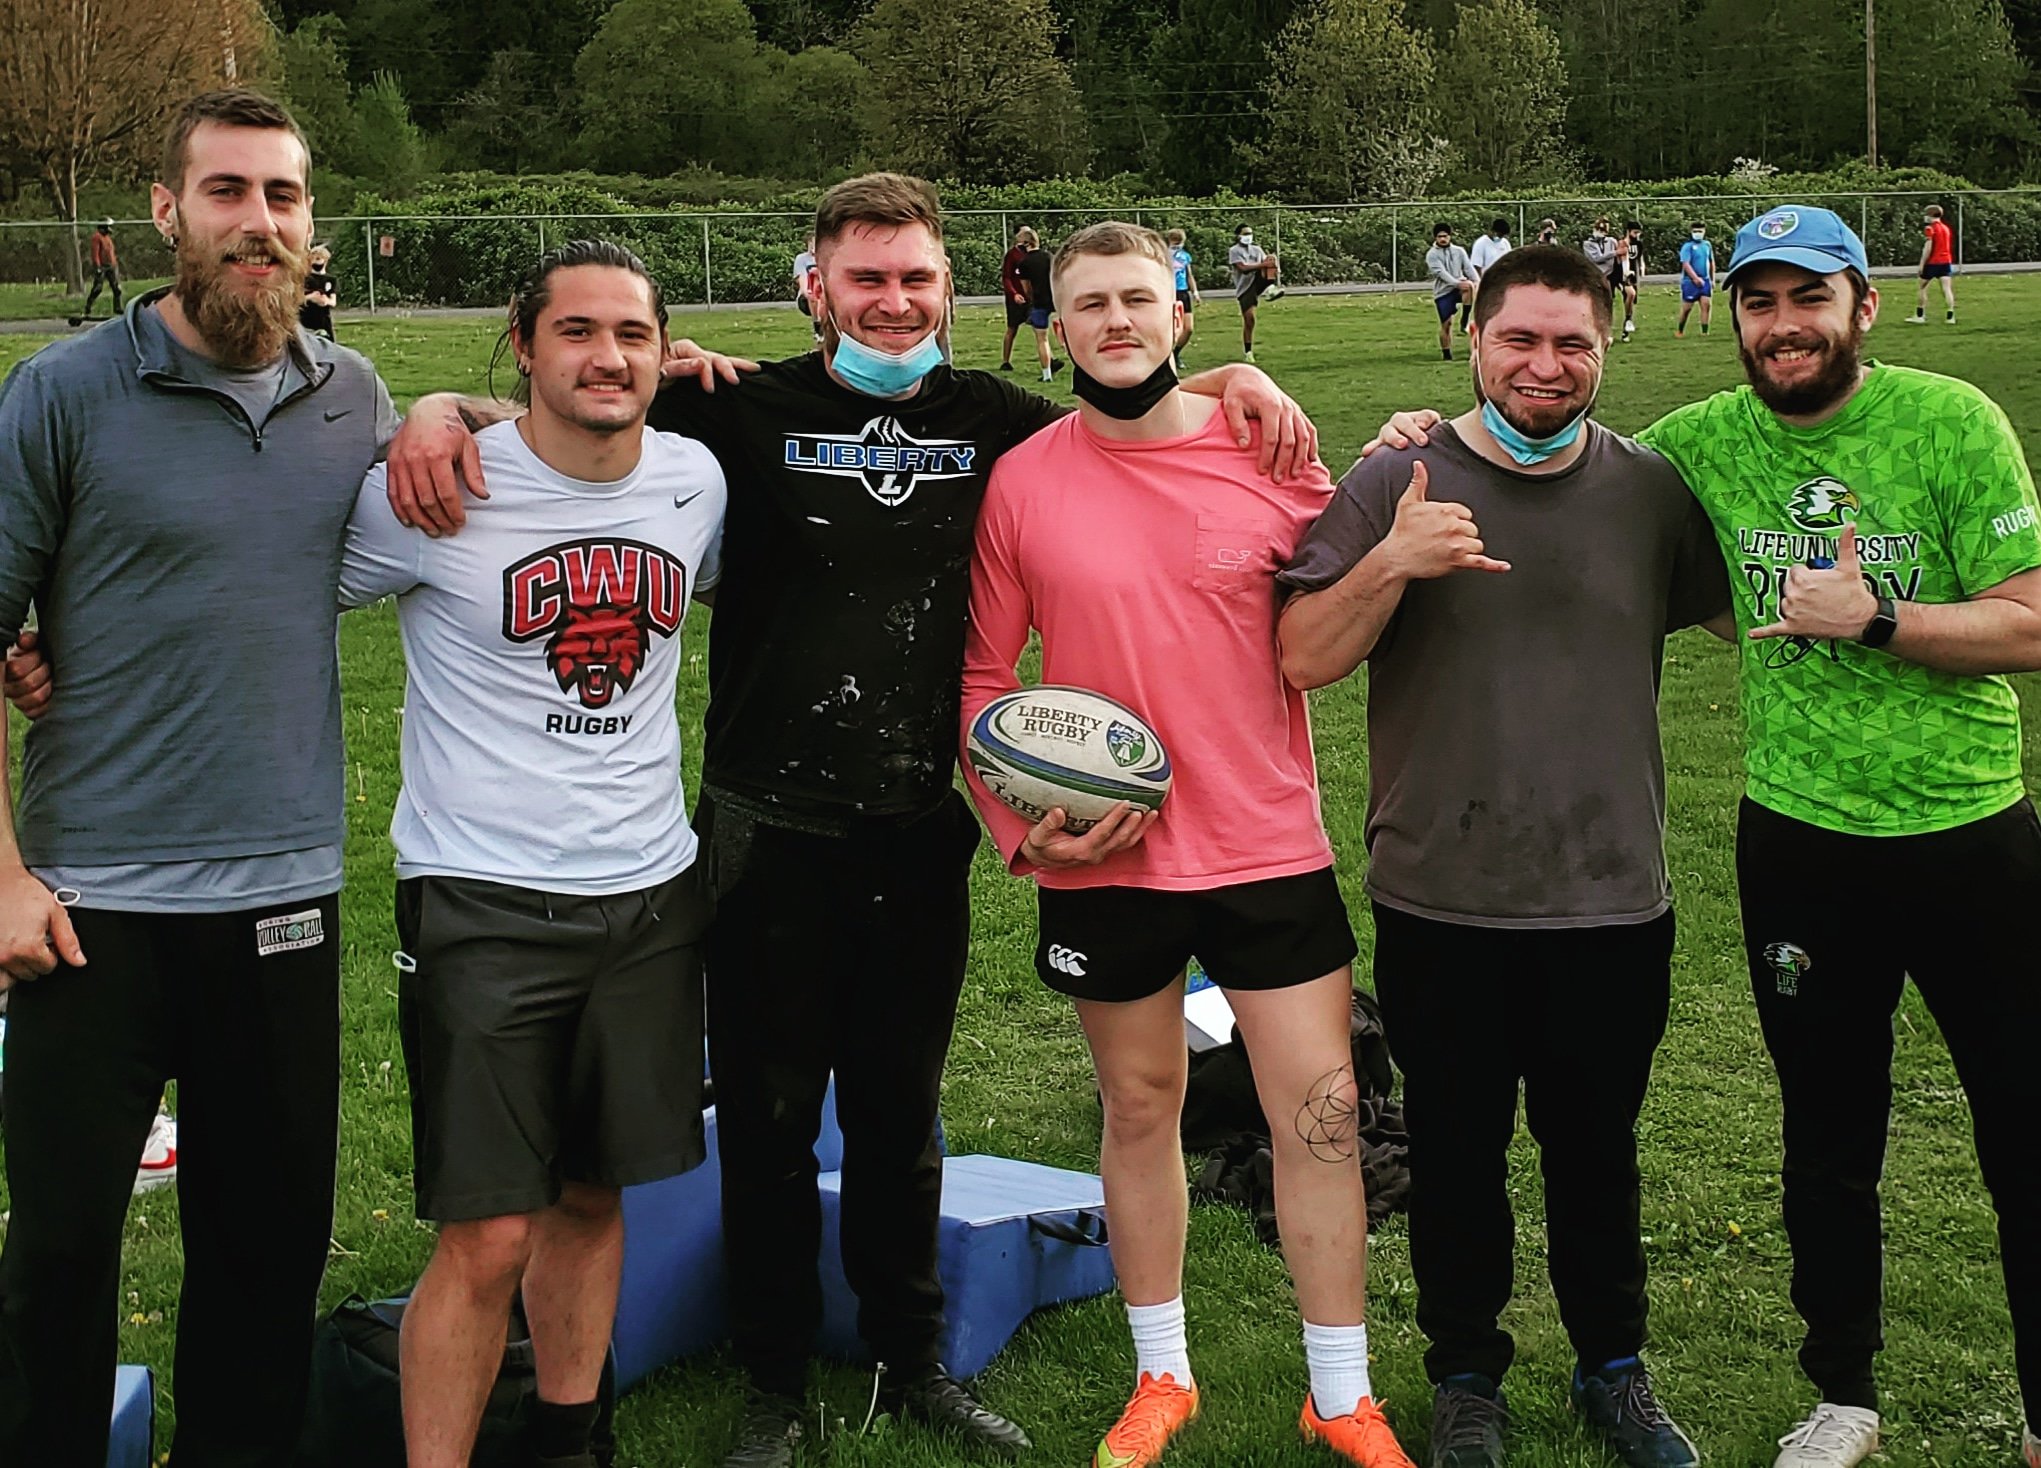 fjols Formand begå Liberty Rugby (@LibertyRugby) / Twitter